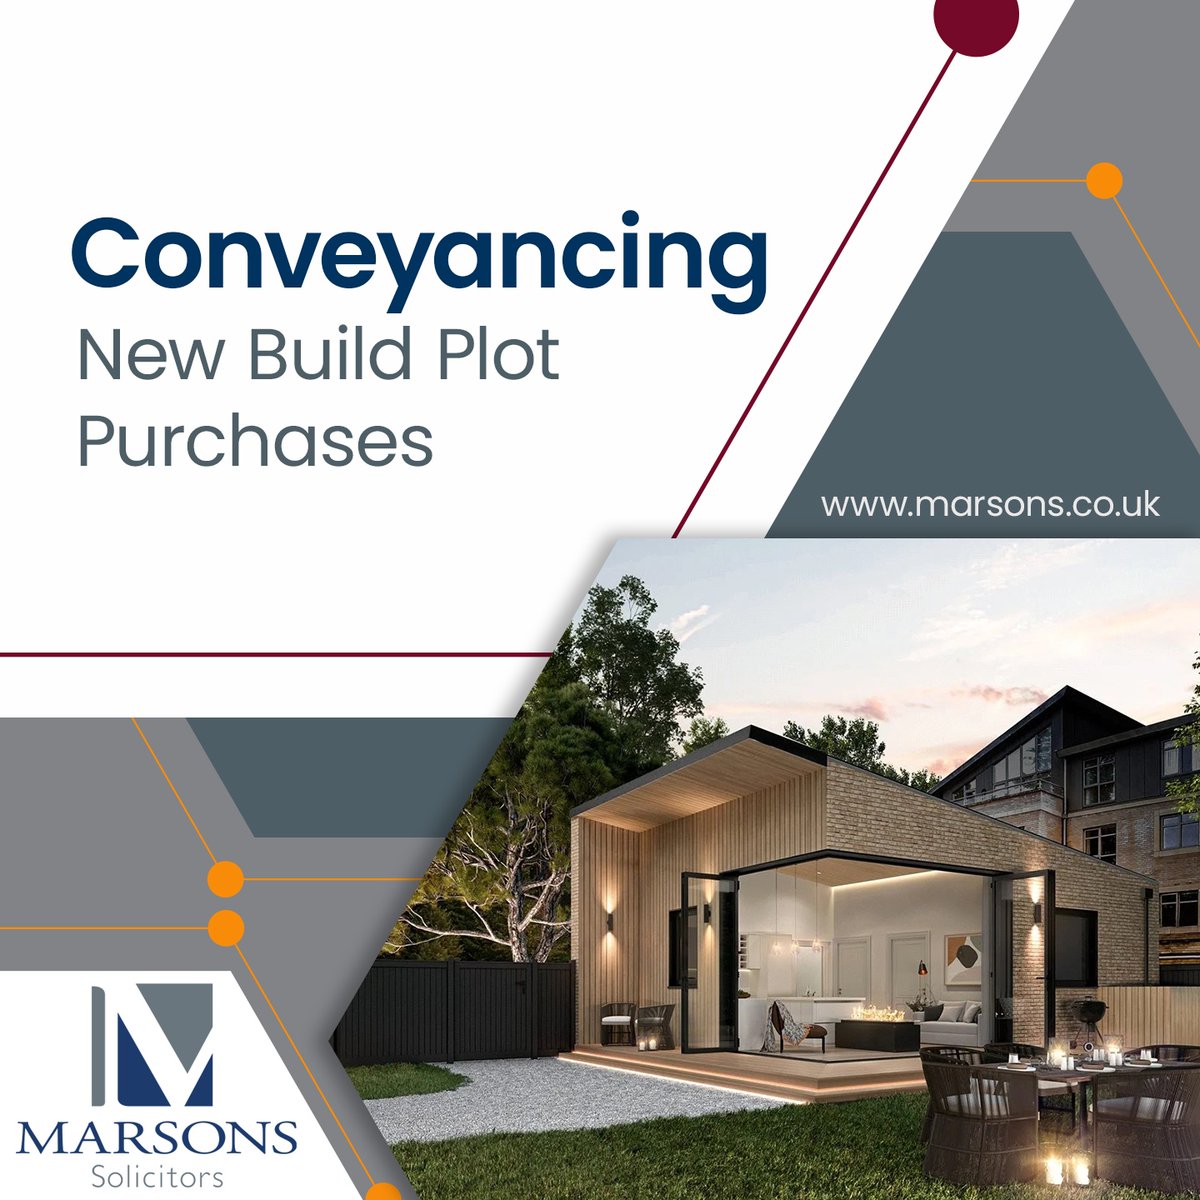 #NewBuild homes may often be included in the #FirstHomes scheme where #firsttimebuyers can purchase one of these #houses for 30%-50% less than the market value. 

If you are a first-time buyer, contact us at Marsons Solicitors today. 

Contact: tinyurl.com/4p7hs2zz